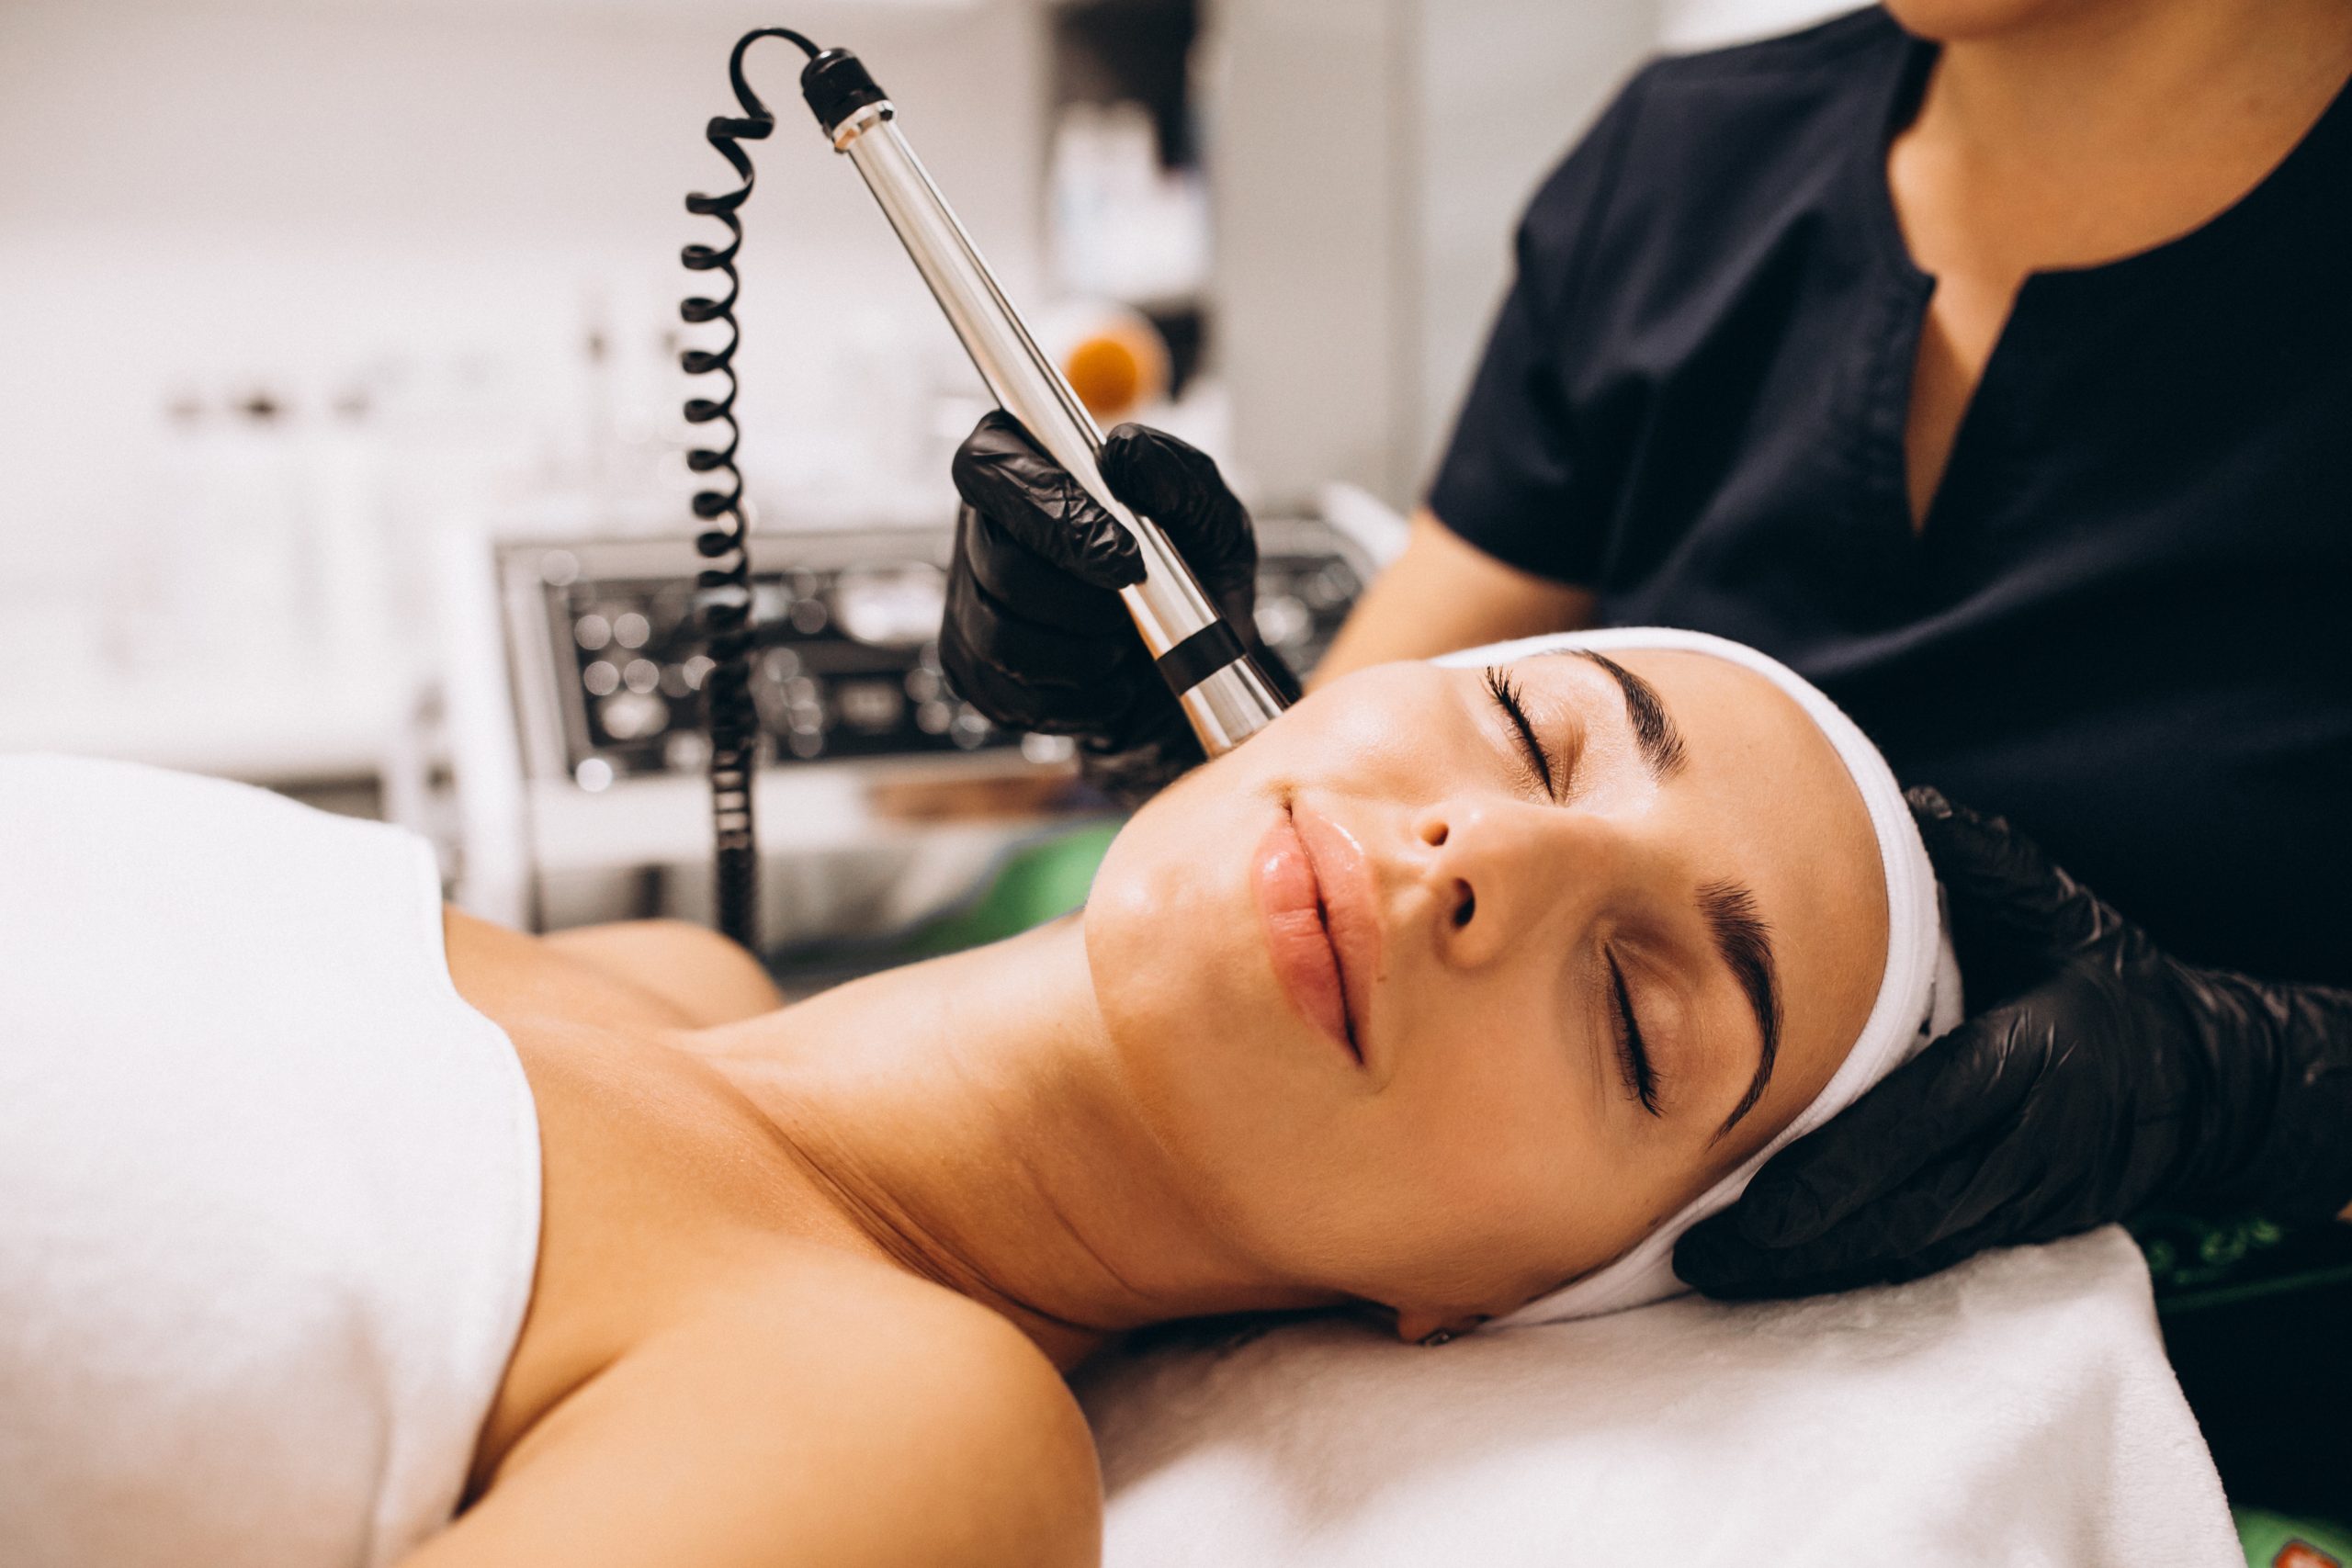 Reasons for the Growing Trend of Non-invasive Cosmetic Procedures